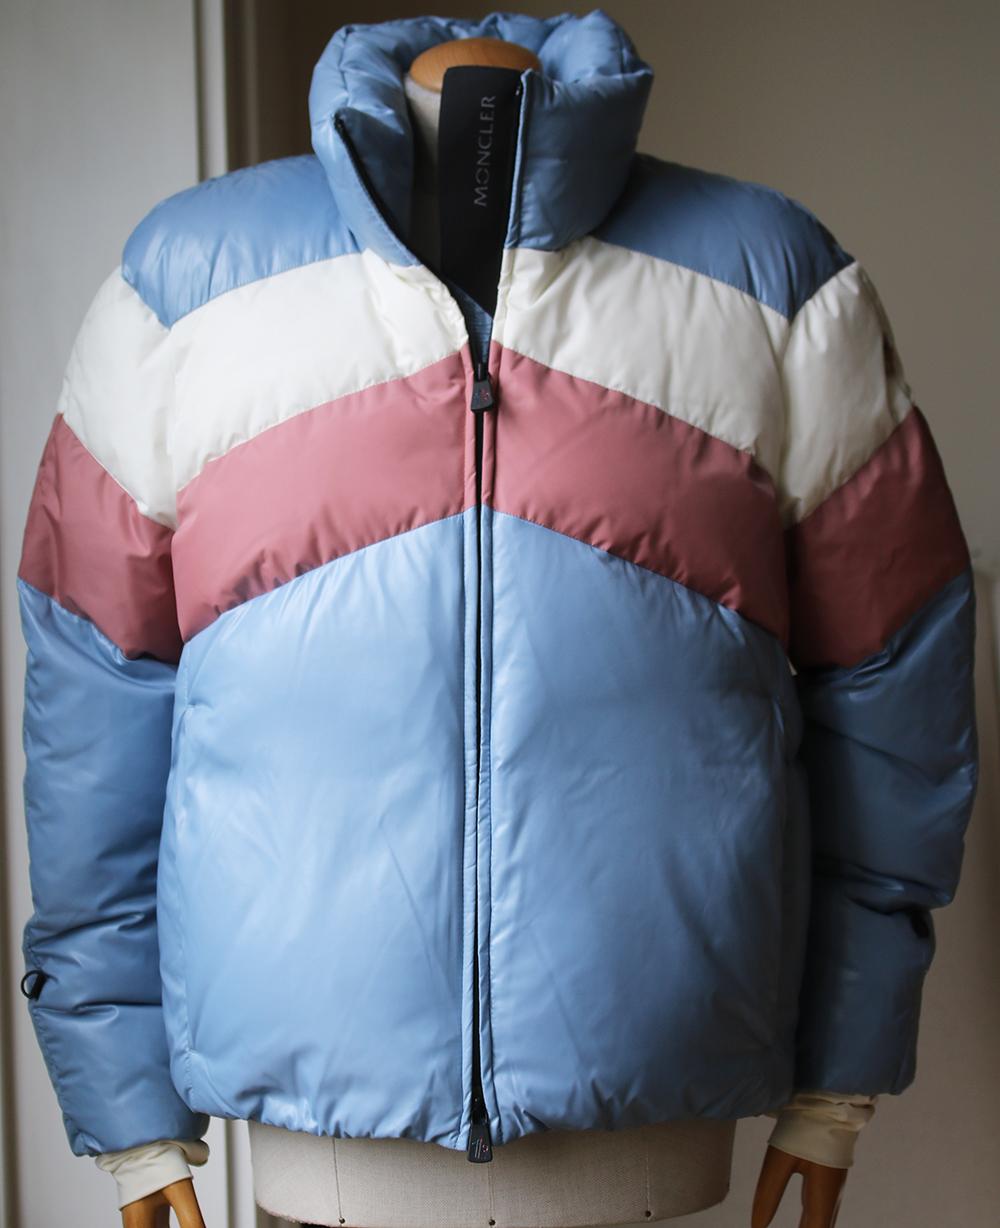 Moncler Grenoble's 'Lamar' jacket is perfect for active days on the slopes or brisk winter walks. Made from color-blocked shell panels, it's packed with insulating down while the adjustable toggled hood and hem lock in heat. Light-blue, white and